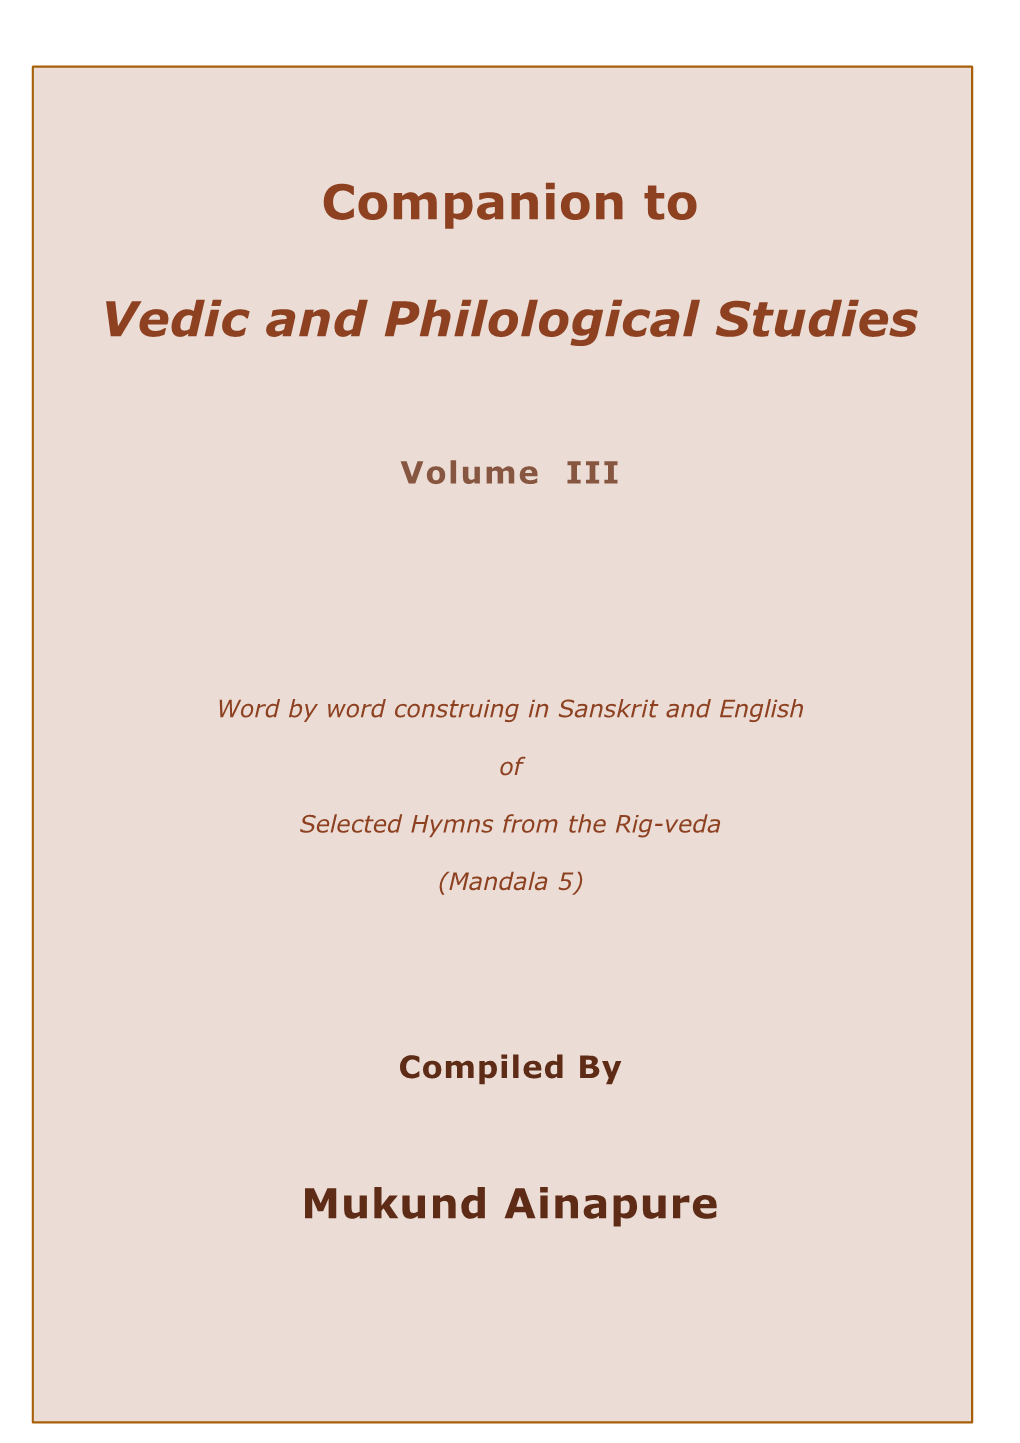 Companion to Vedic and Philological Studies